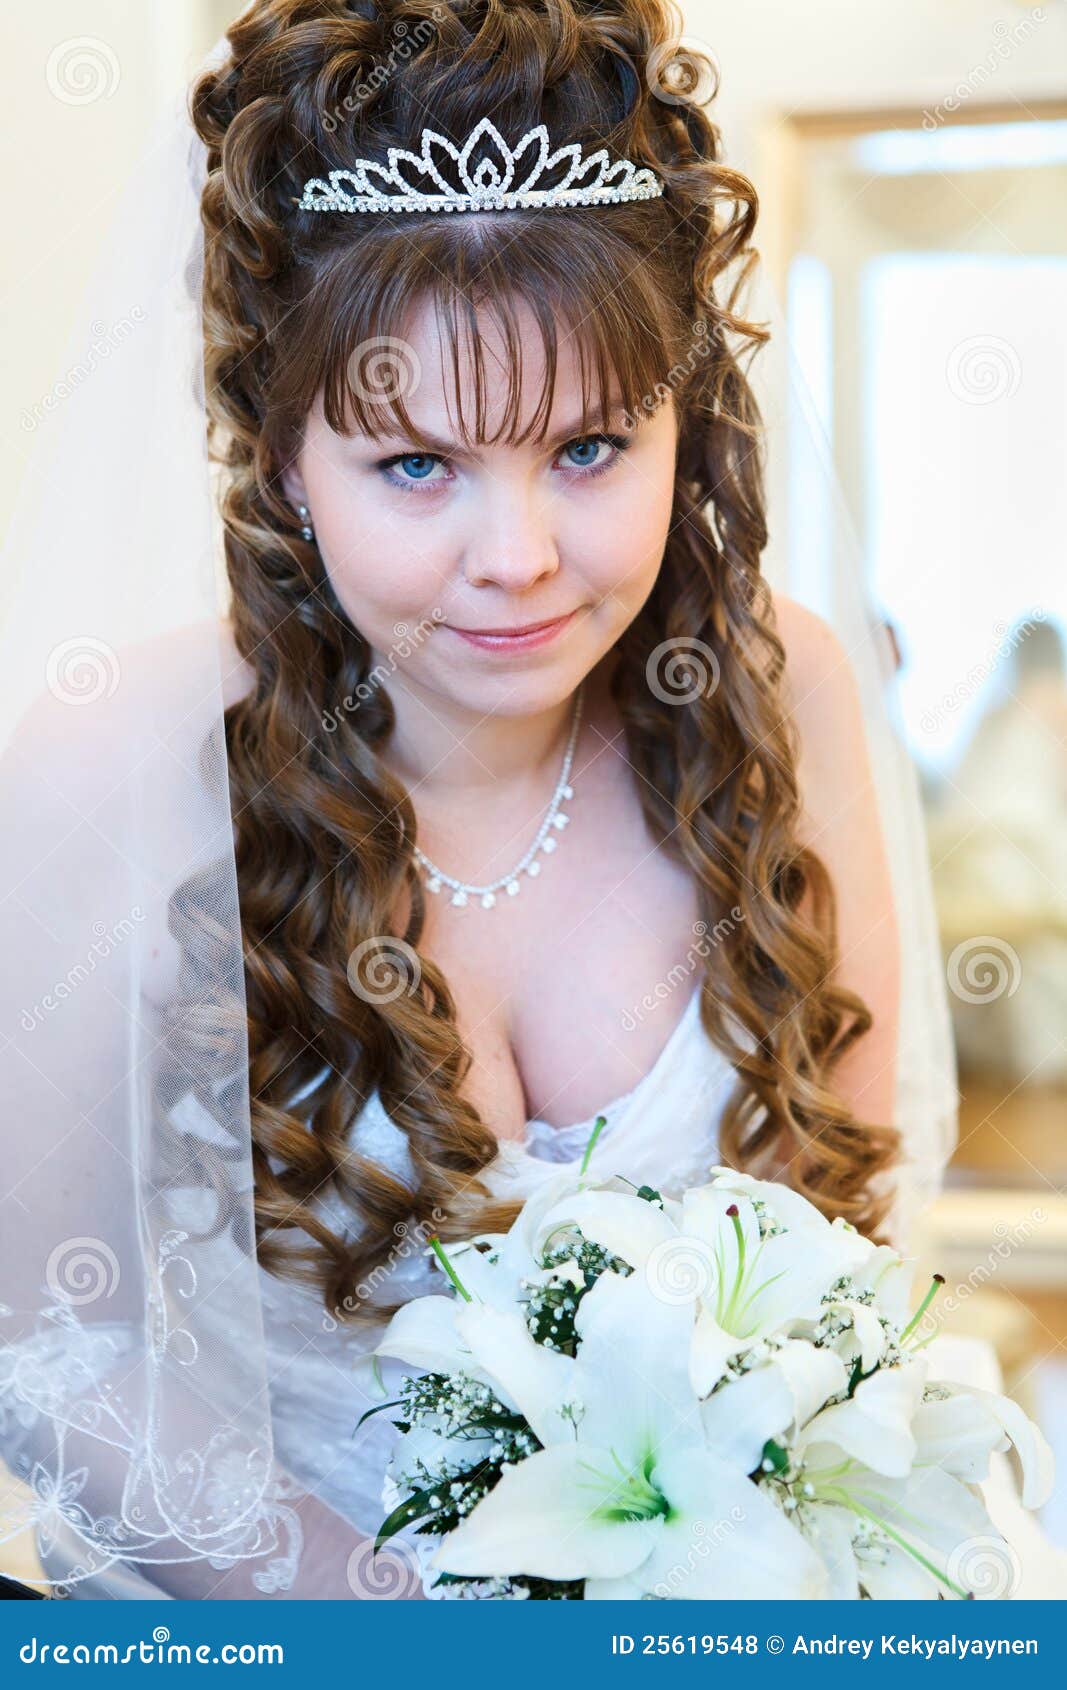 With Your Russian Bride Flower 43